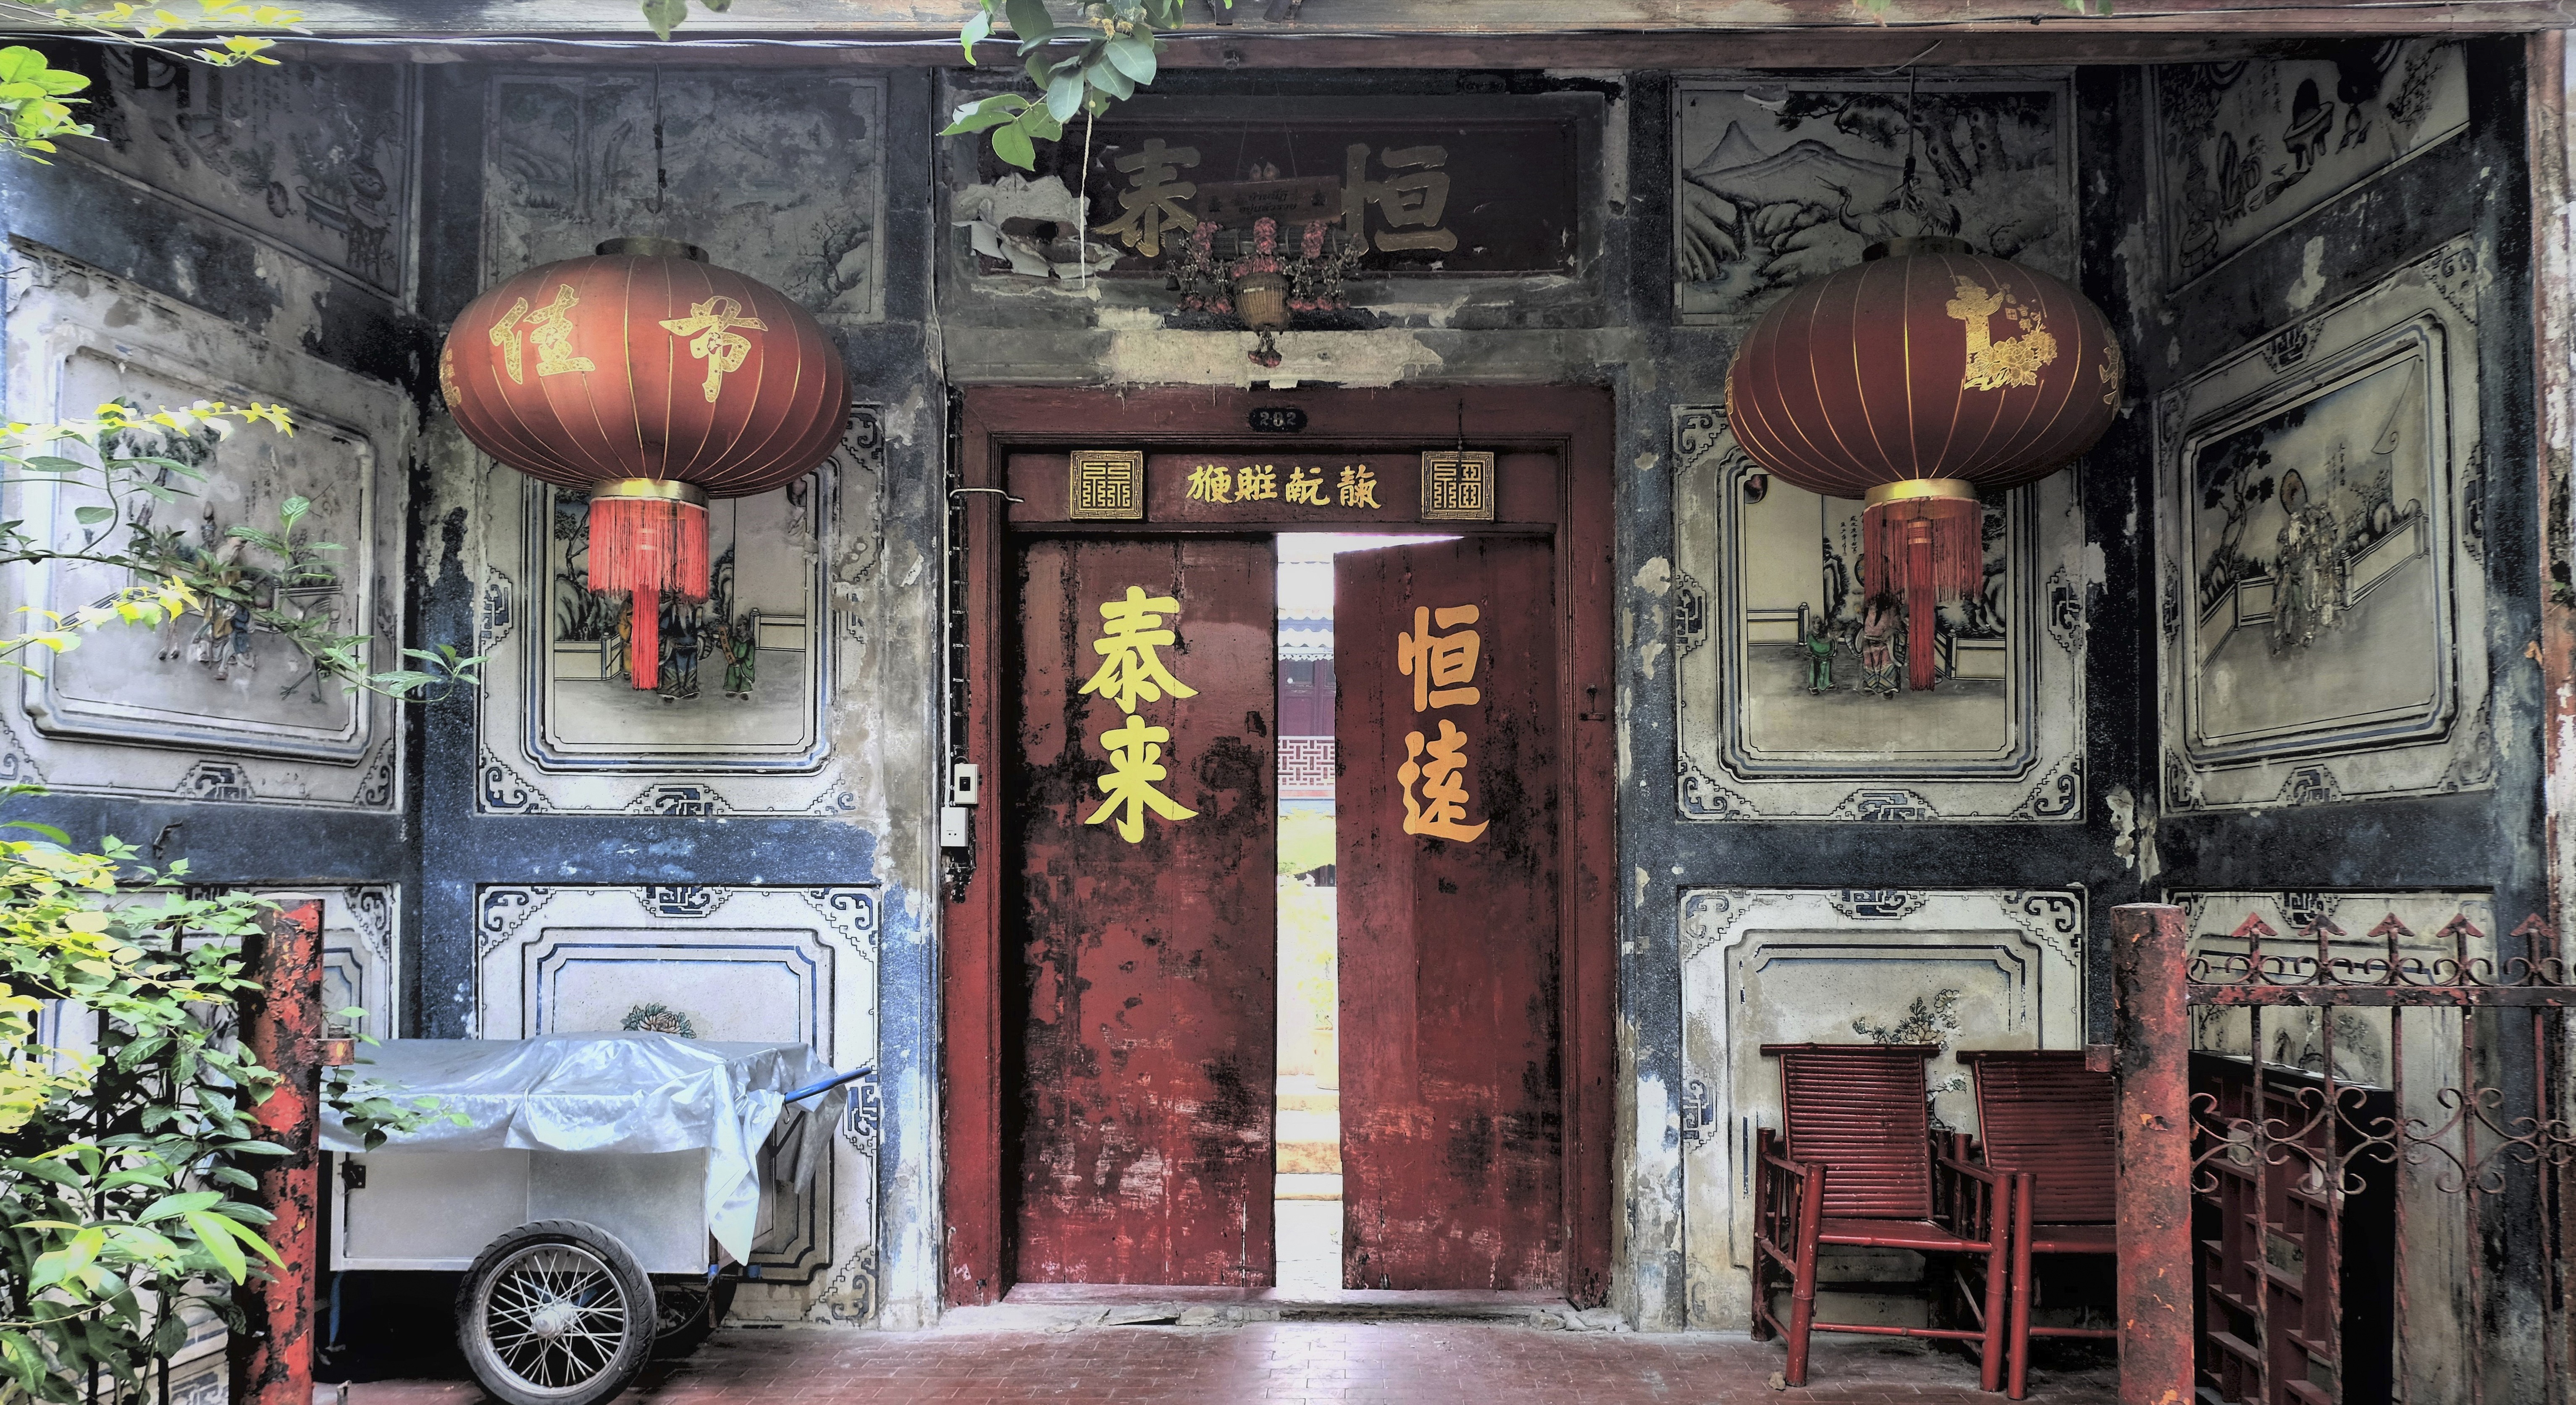 The entrance to Bangkok’s oldest private residence, the So Heng Tai Mansion, which was built by a trader from Fujian, China, who settled in the Thai capital in the early 19th century. Photo: Tibor Krausz